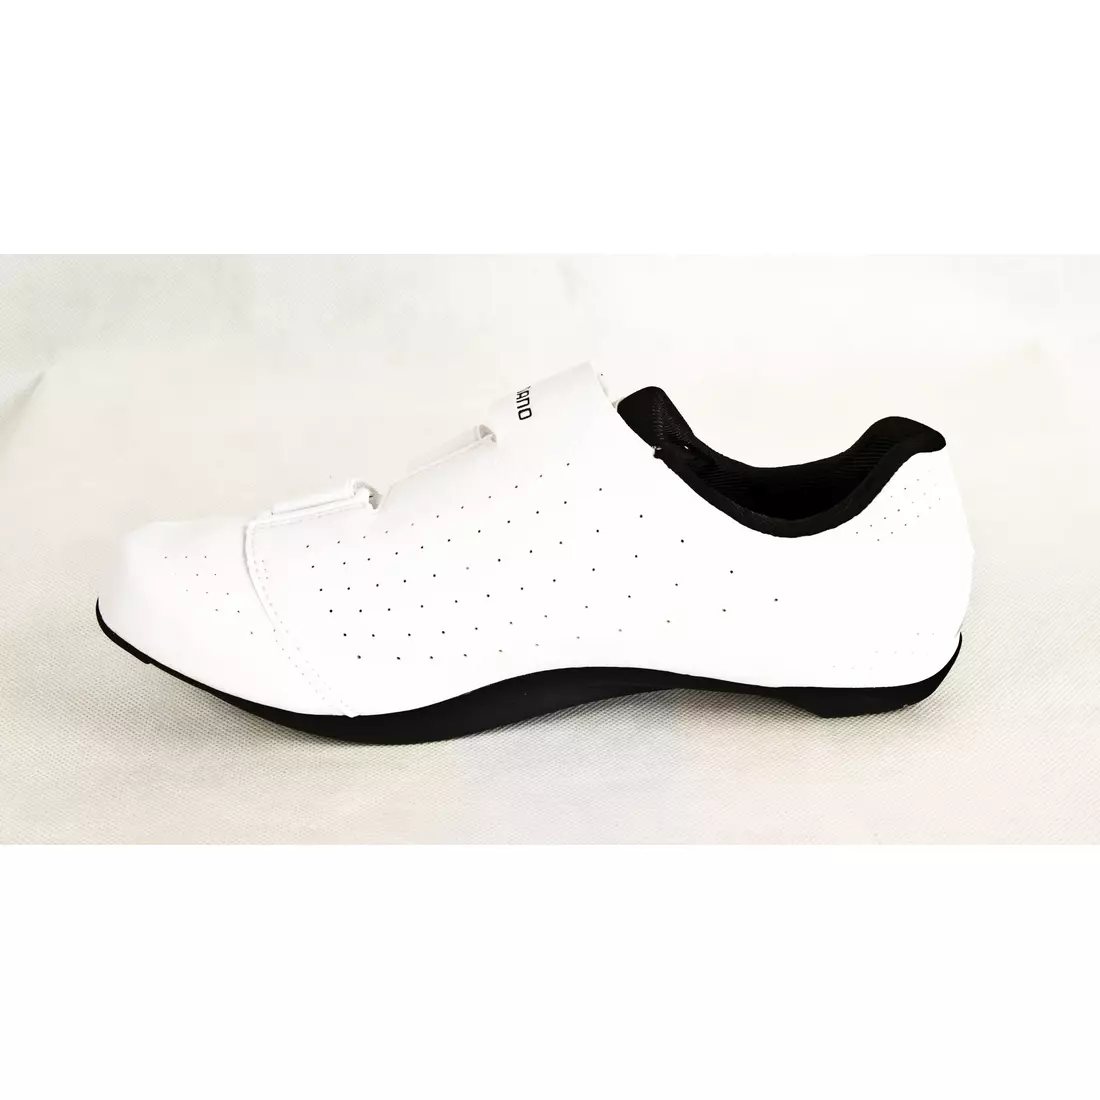 SHIMANO SHRP500SW road cycling shoes, white